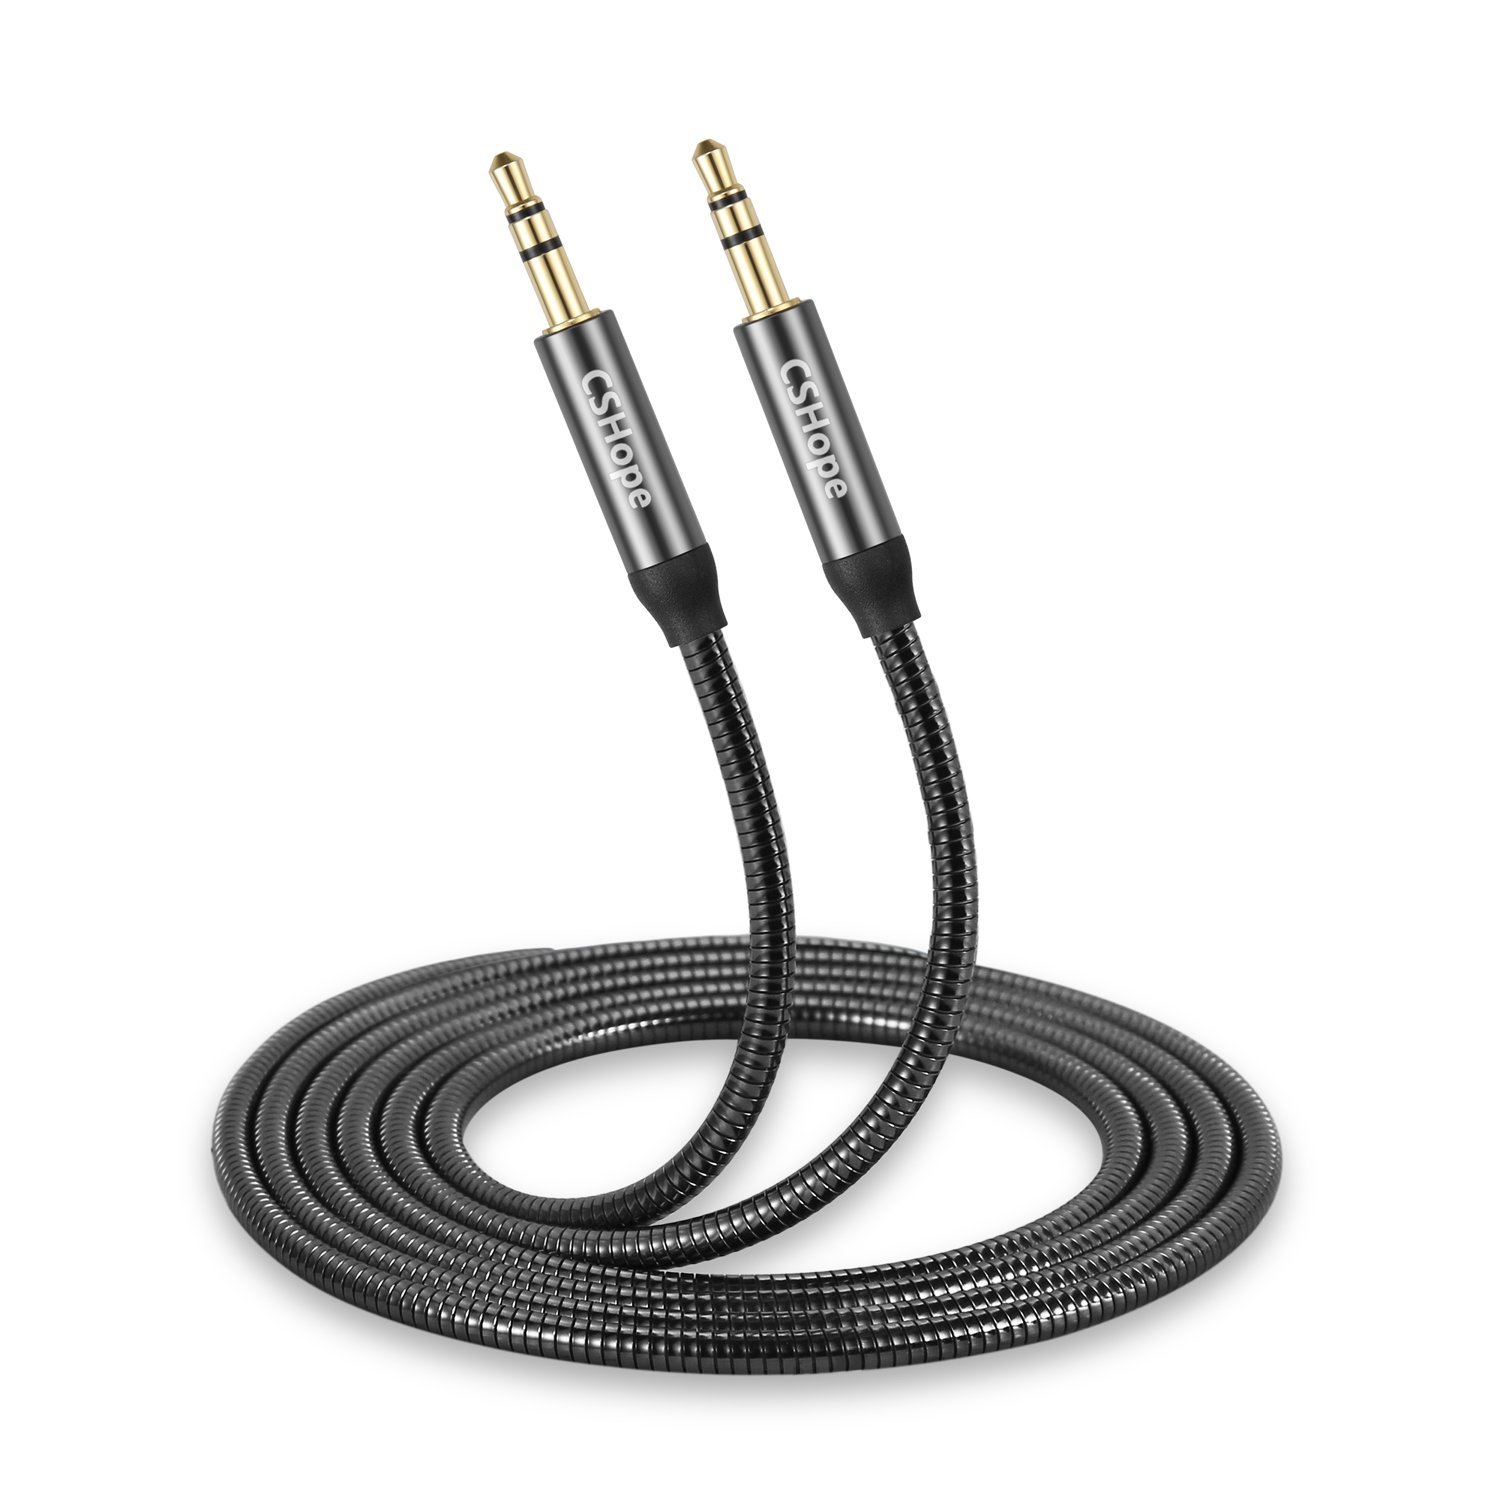 Durable AUX cable for multi-use audio stream.